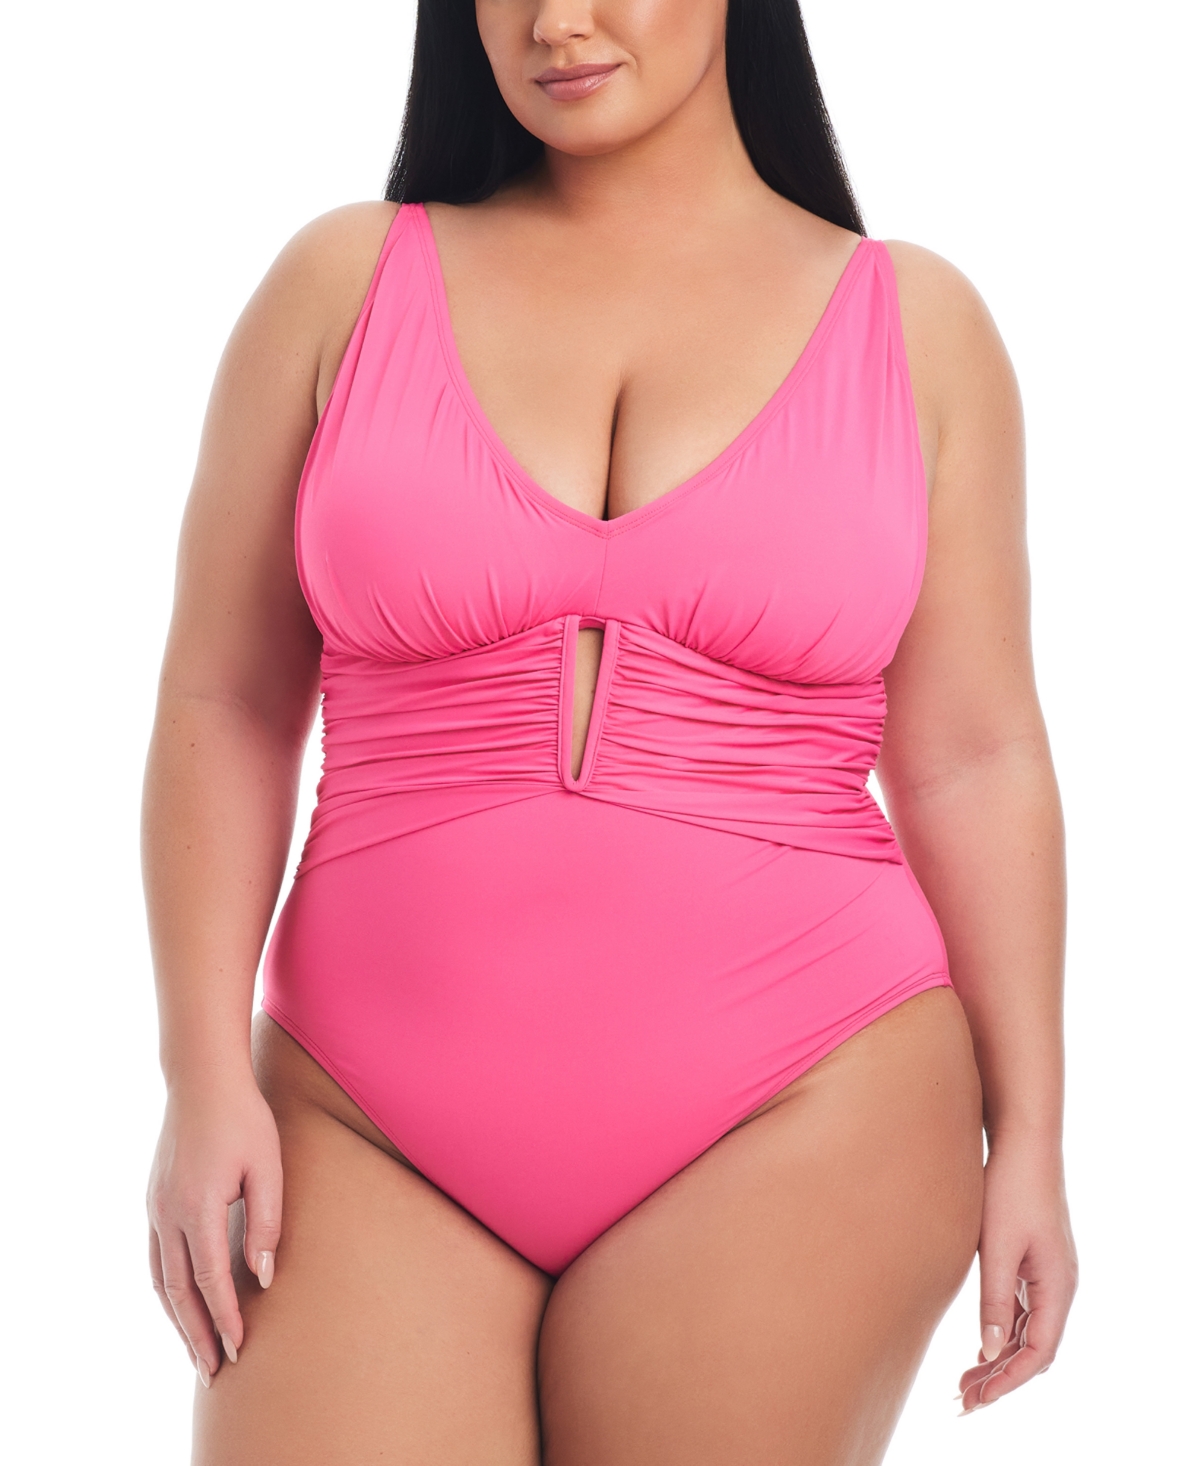 Plus Size Ruched One-Piece Swimsuit - Black